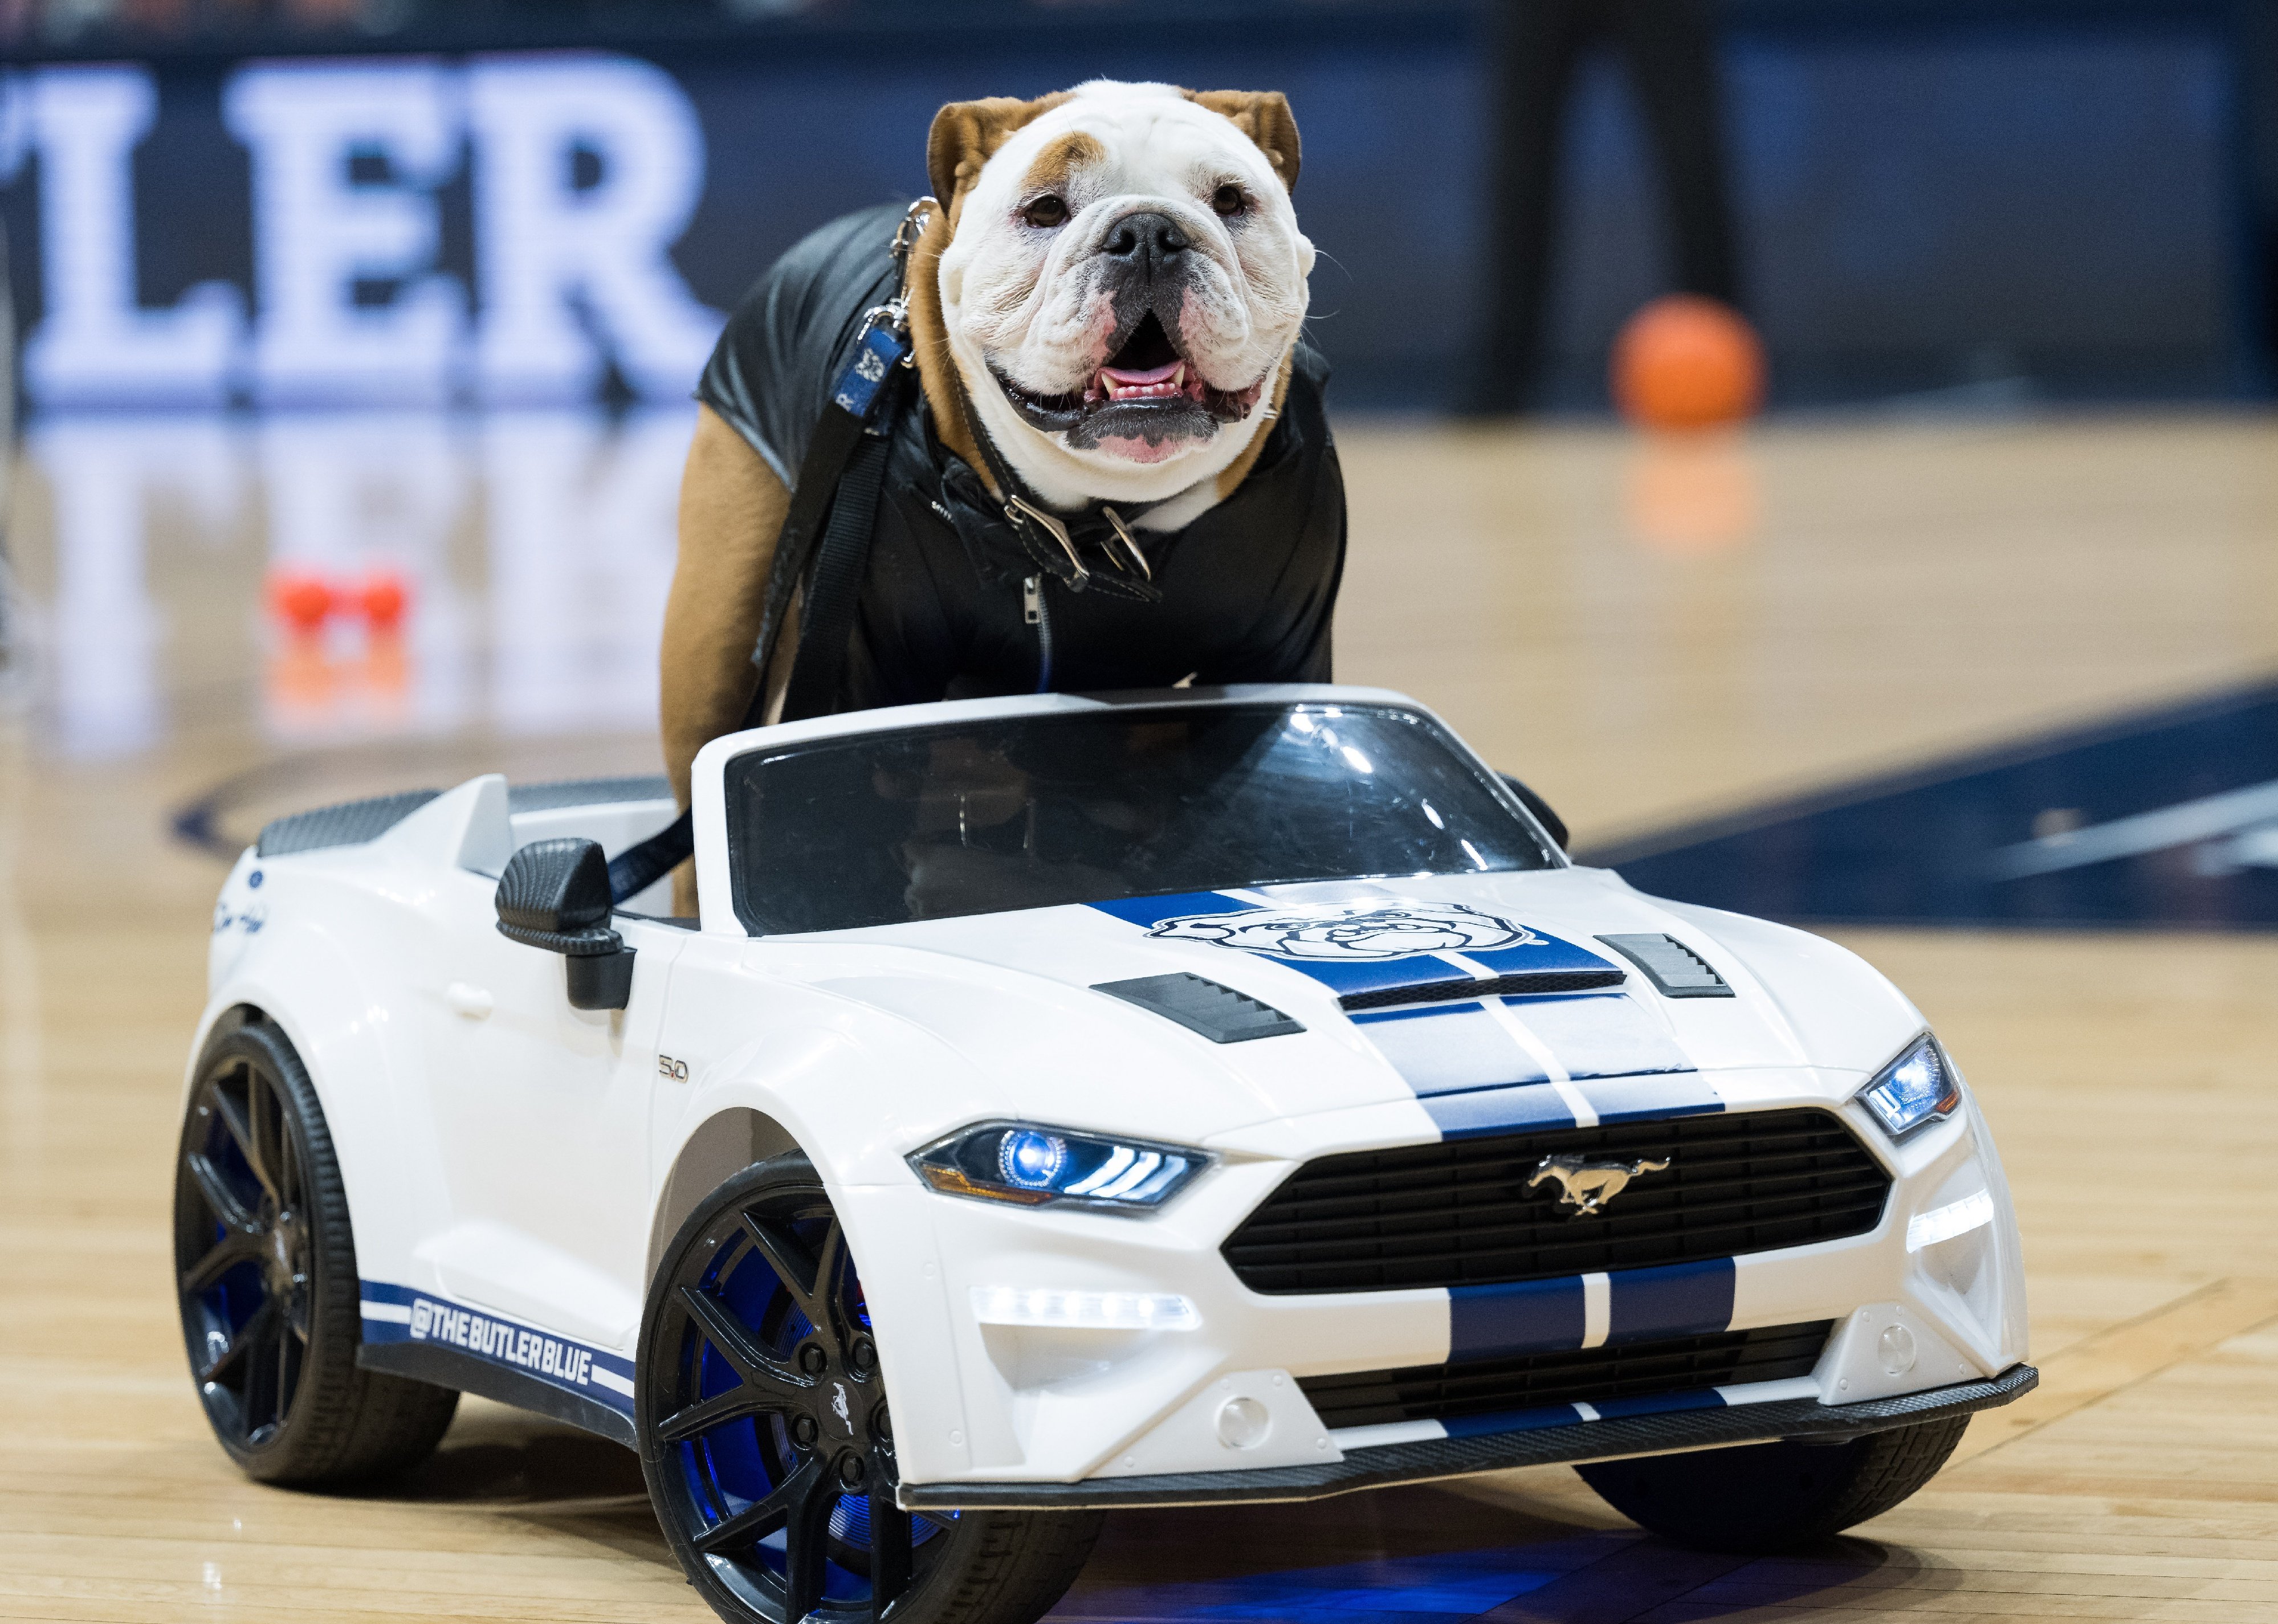 Butler mascot Blue IV rides in a car on the floor during a men's college basketball game.